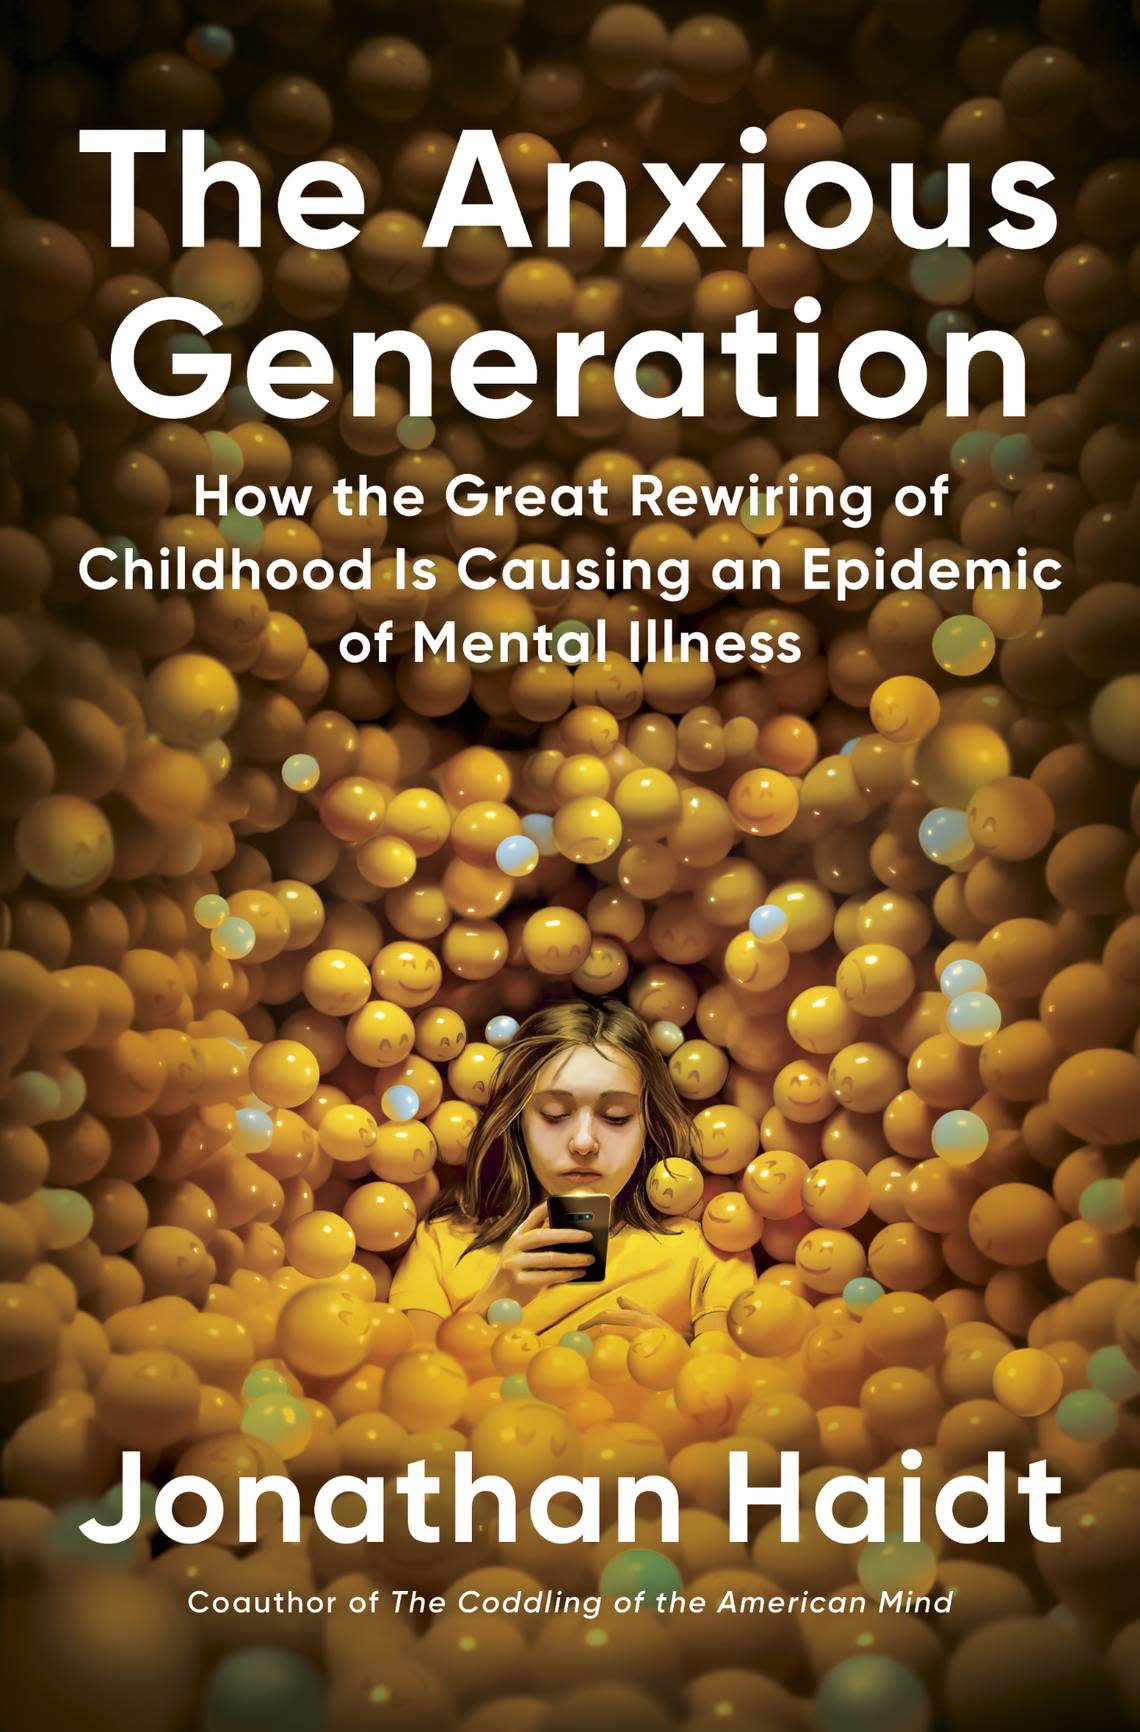 “The Anxious Generation: How the Great Rewiring of Childhood Is Causing an Epidemic of Mental Illness” by Jonathan Haidt. (Penguin Press/TNS)